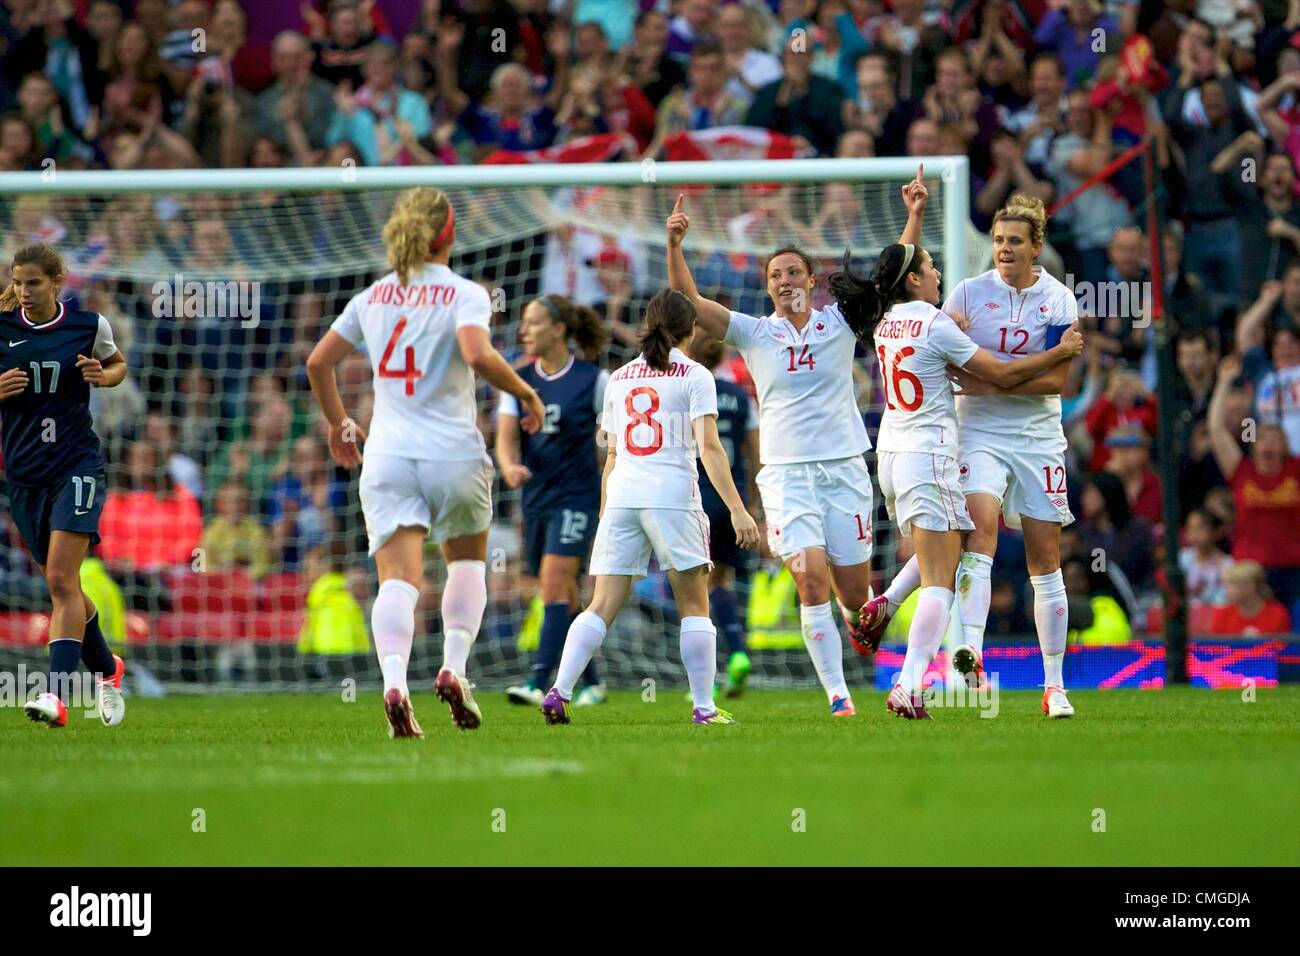 06.08.2012 Manchester, England. Canada celebrate going a goal ahead during the women's semi final match between Team USA and Canada at Old Trafford. USA scored a late injury time winner to go through to the gold medal match by a score of 4-3. Stock Photo